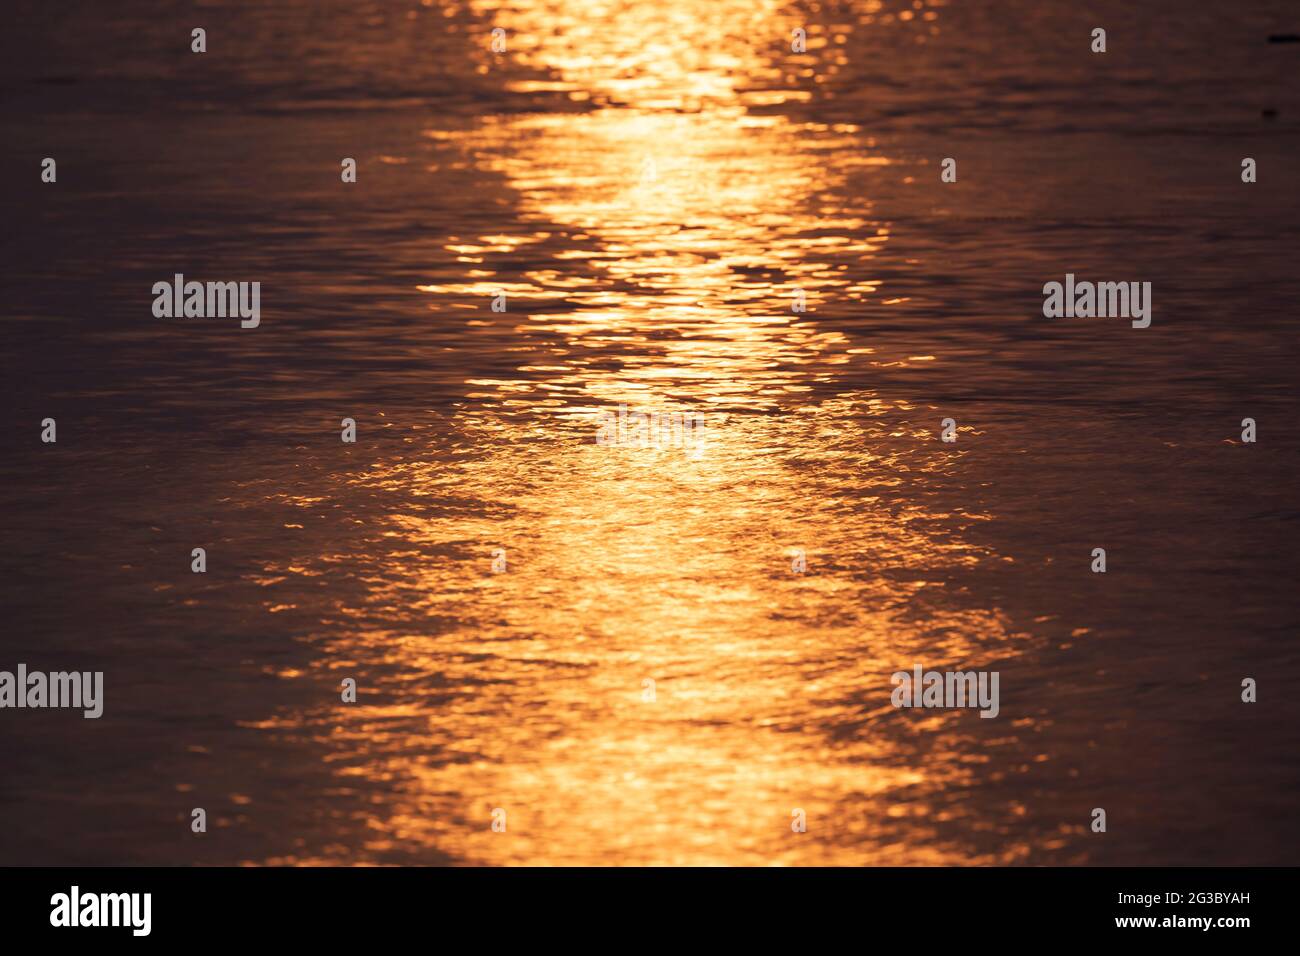 Orange and a bit purple sunset sunlight, reflected on the uneven surface of the water, on the island of Koh Chang, Gulf of Thailand Stock Photo